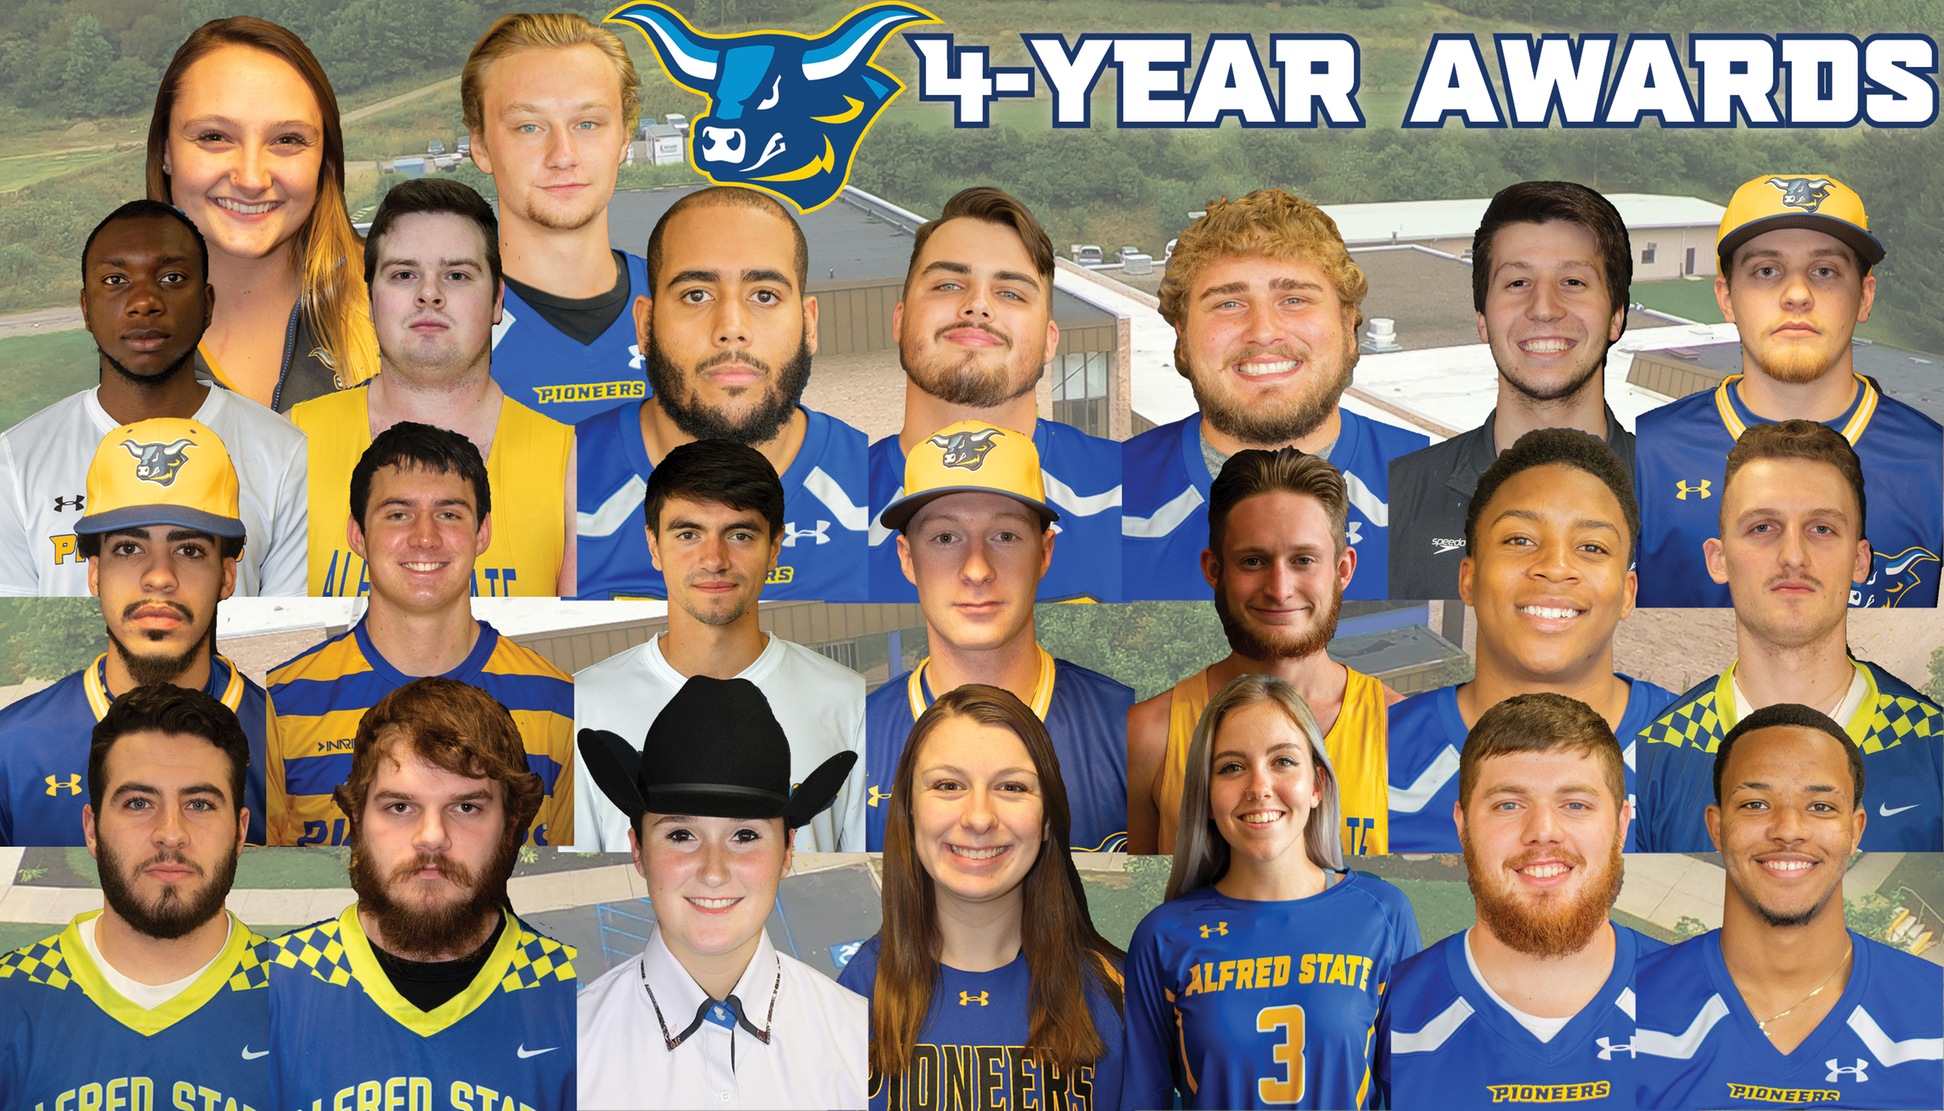 Alfred State honors student-athletes that have competed for 4-Years